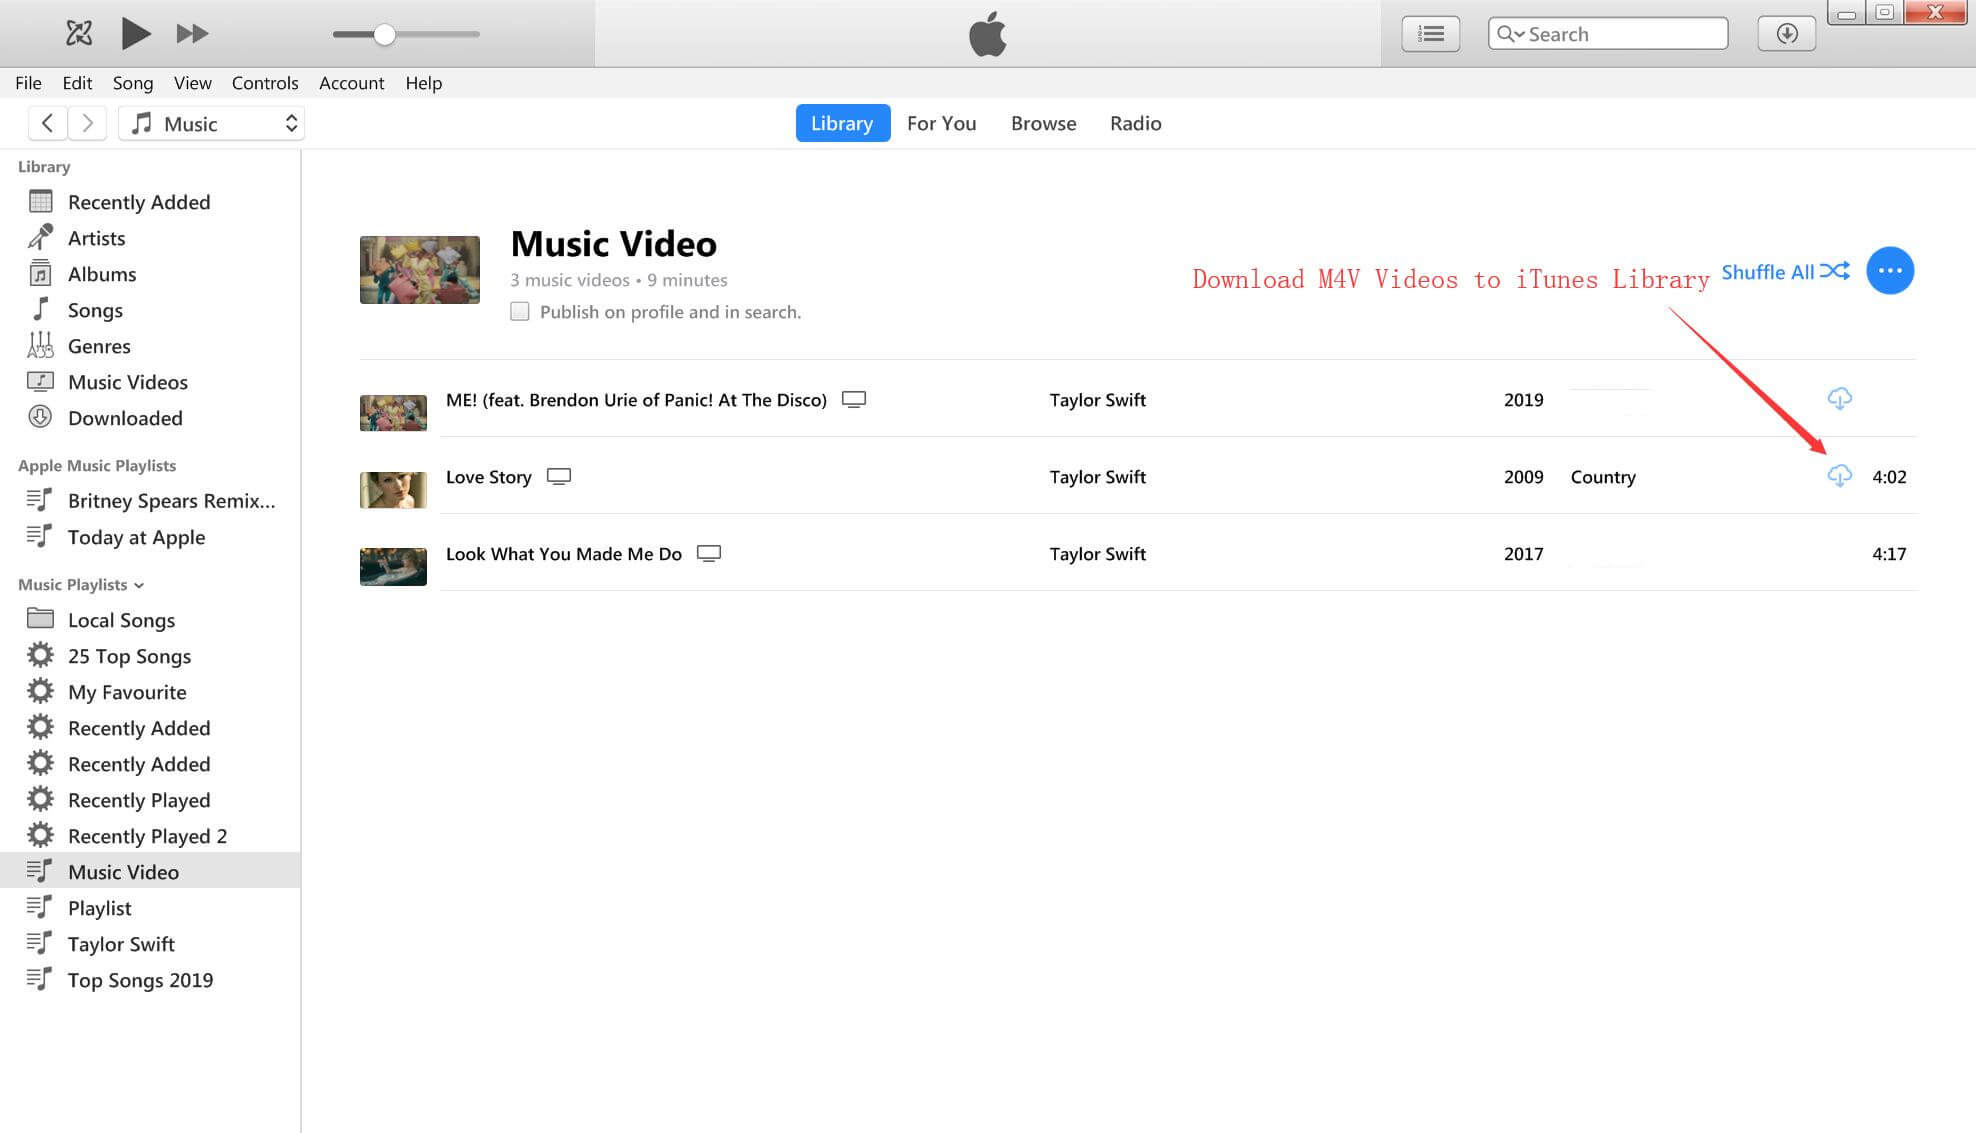 download video to iTunes library